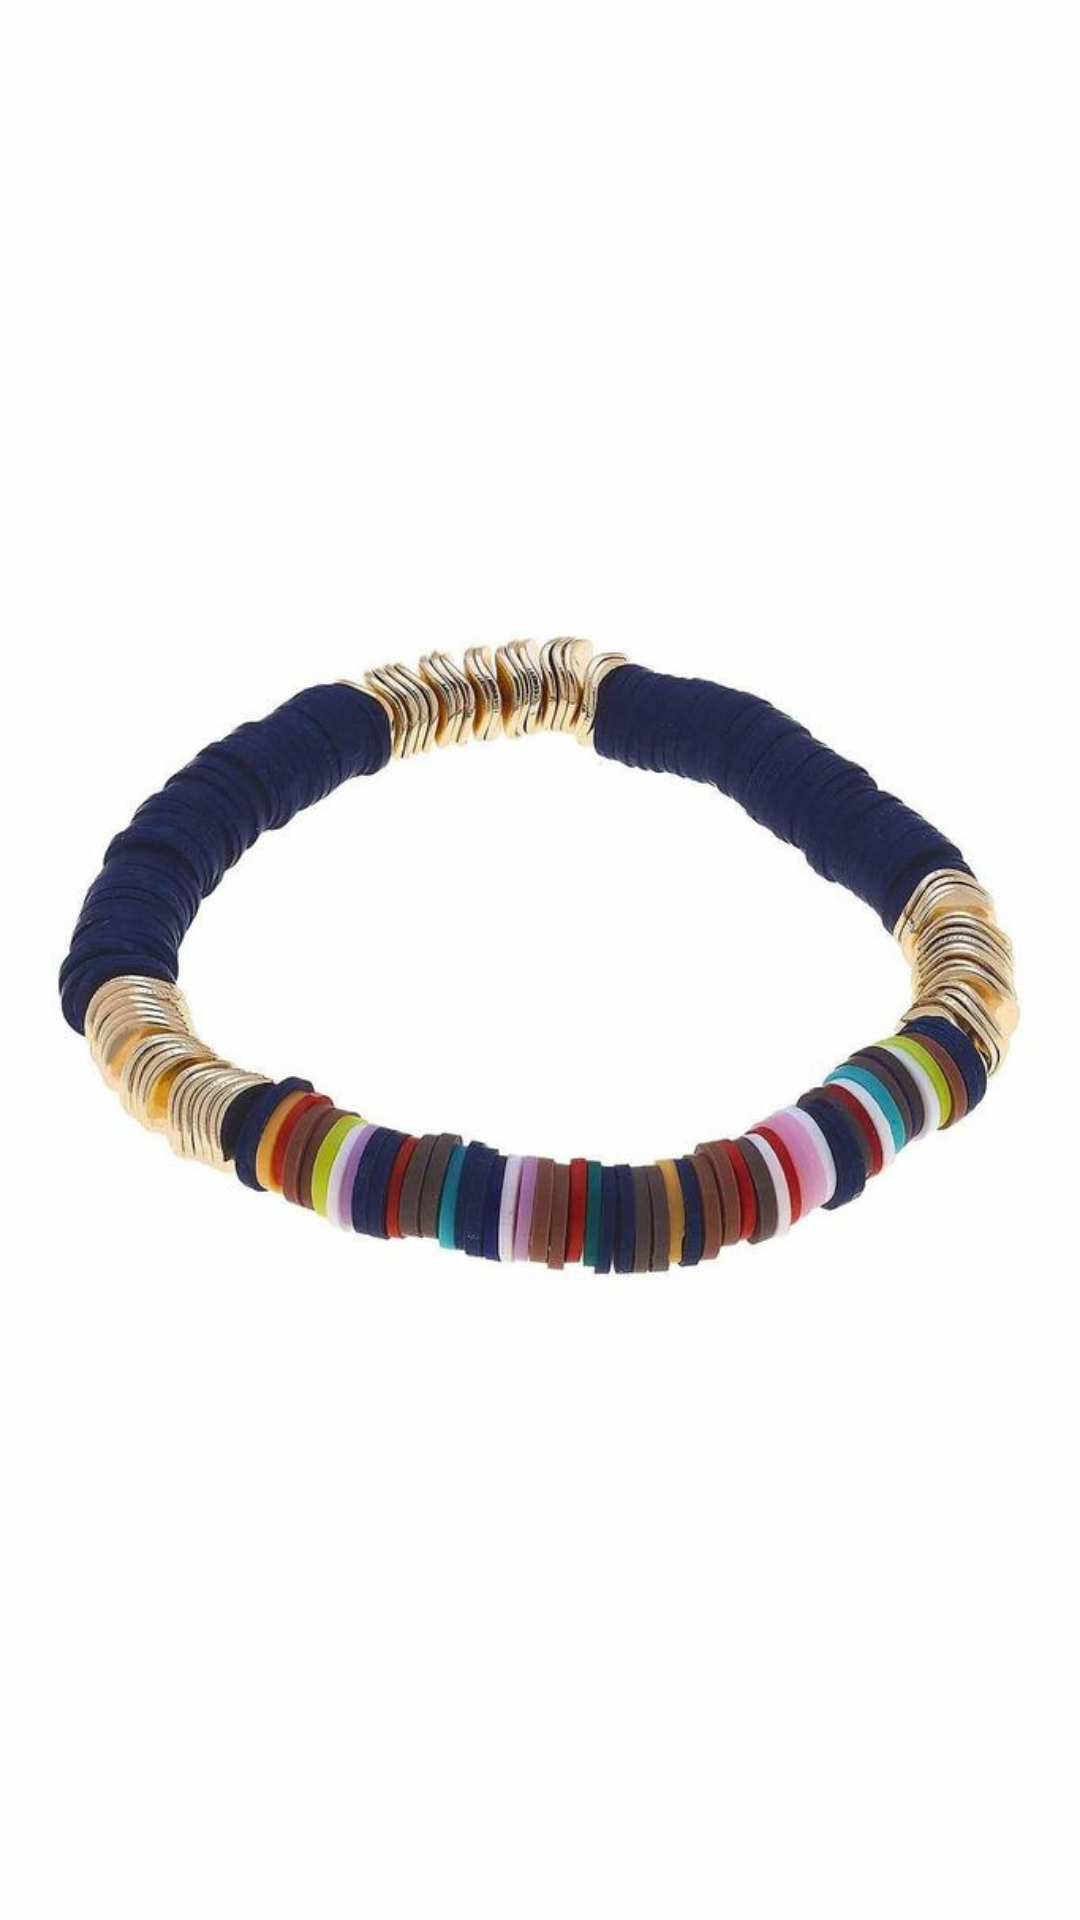 [CANVAS] Emberly Color-Block Bracelet in Navy Autumn Multi Polymer Clay